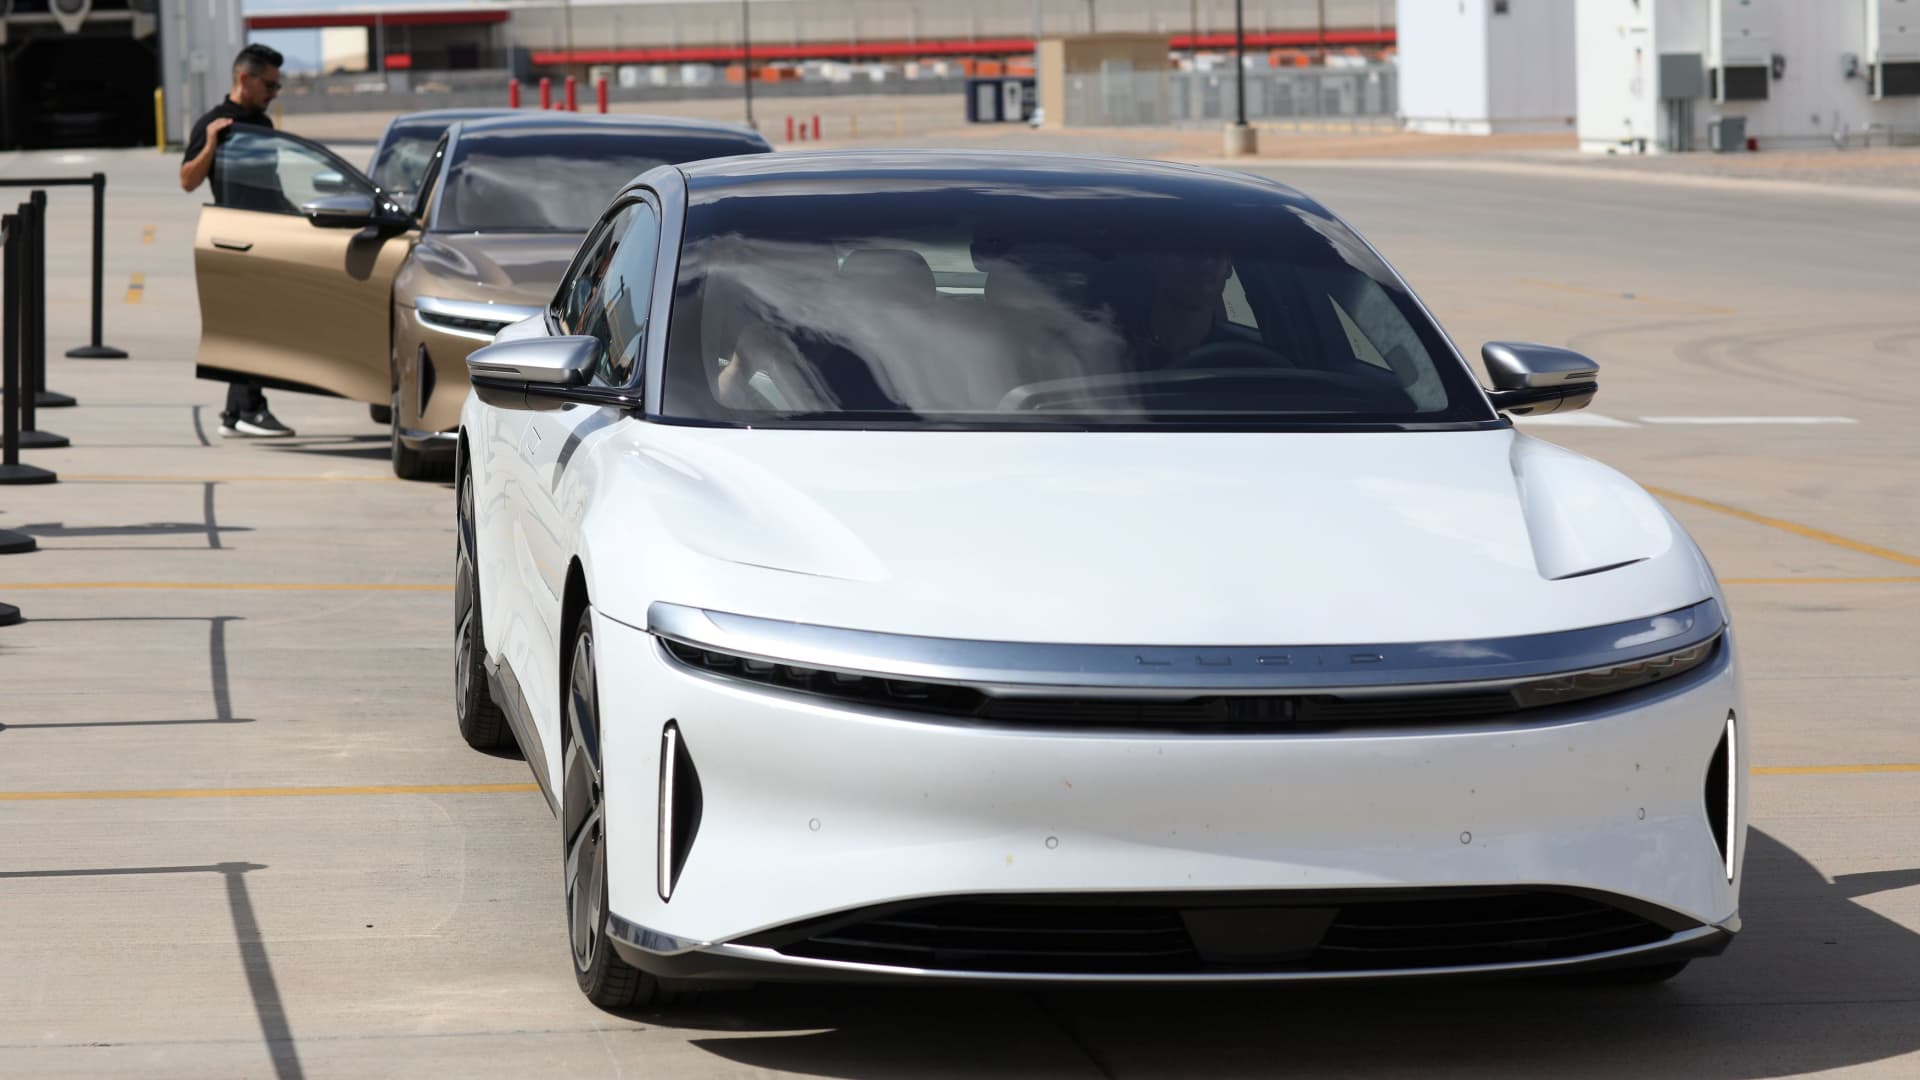 People test drive Dream Edition P and Dream Edition R electric vehicles at the Lucid Motors plant in Casa Grande, Arizona, September 28, 2021.